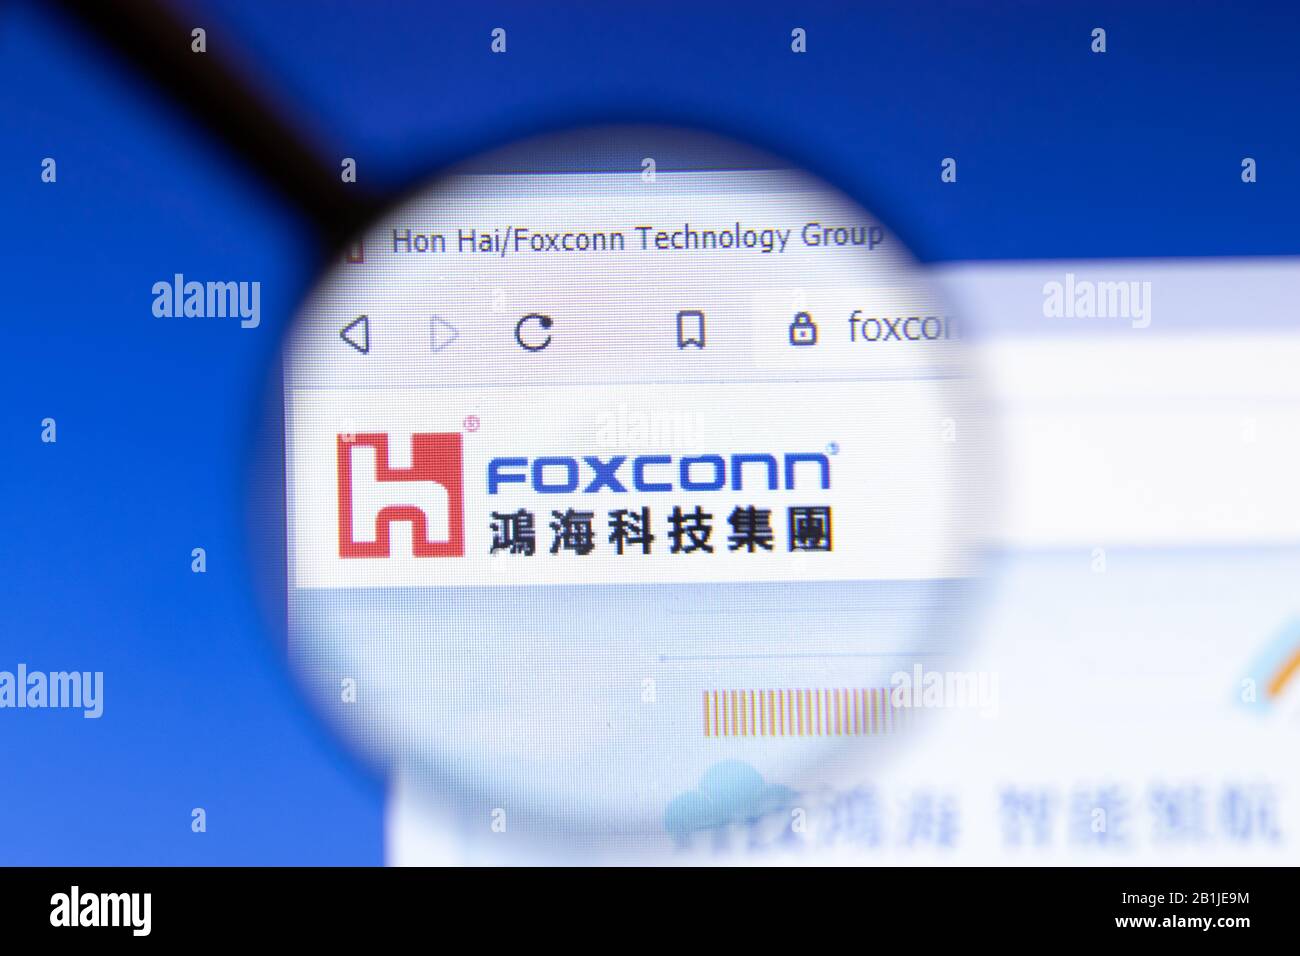 Los Angeles, California, USA - 25 February 2020: Hon Hai Precision Industry website homepage icon. Foxconn.com logo visible on display screen Stock Photo